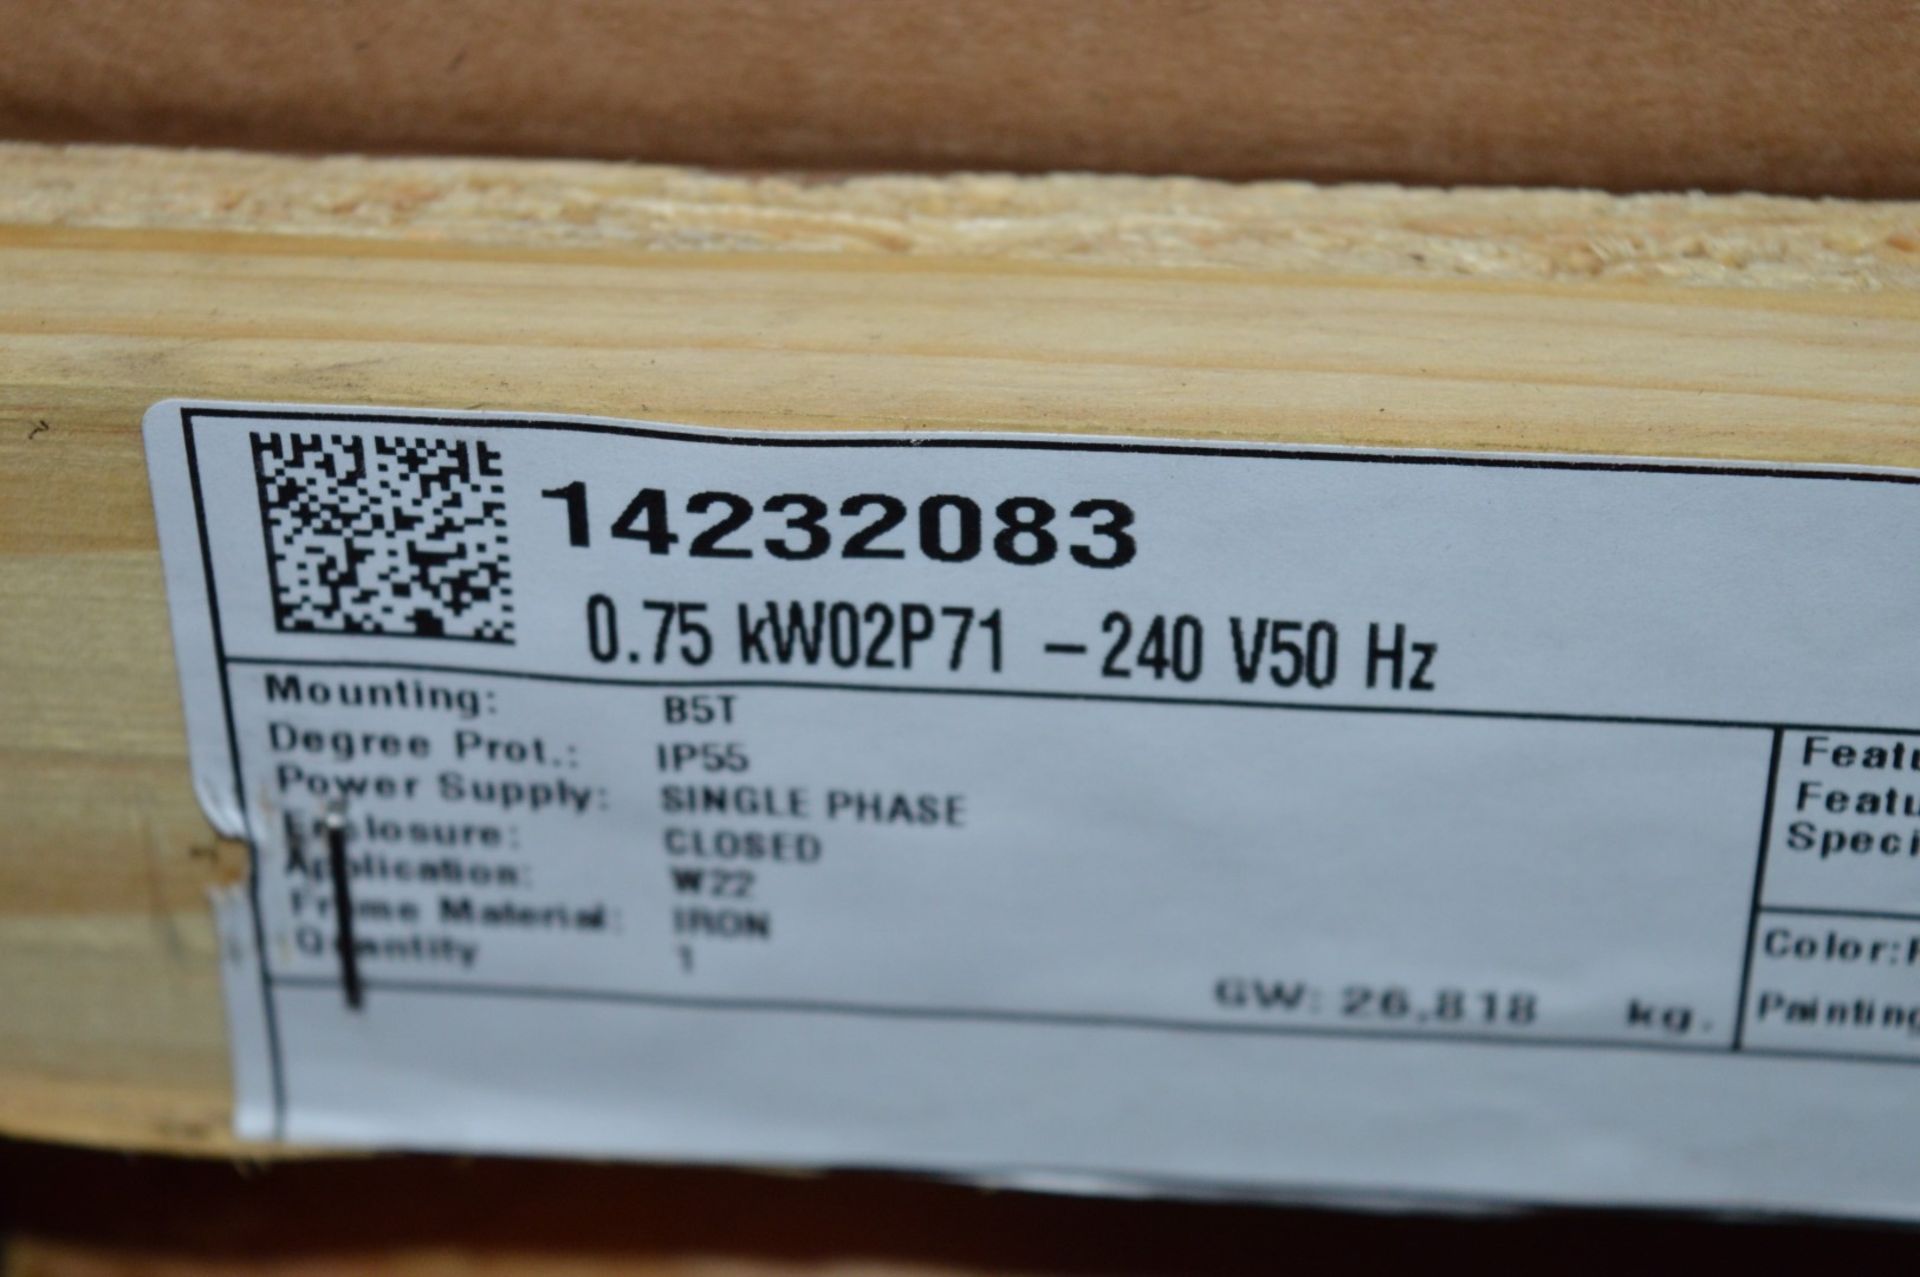 1 x Weg W22 240v IP55 Single Phase Electric Motor - New and Boxed - CL295 - Location: Altrincham - Image 6 of 8